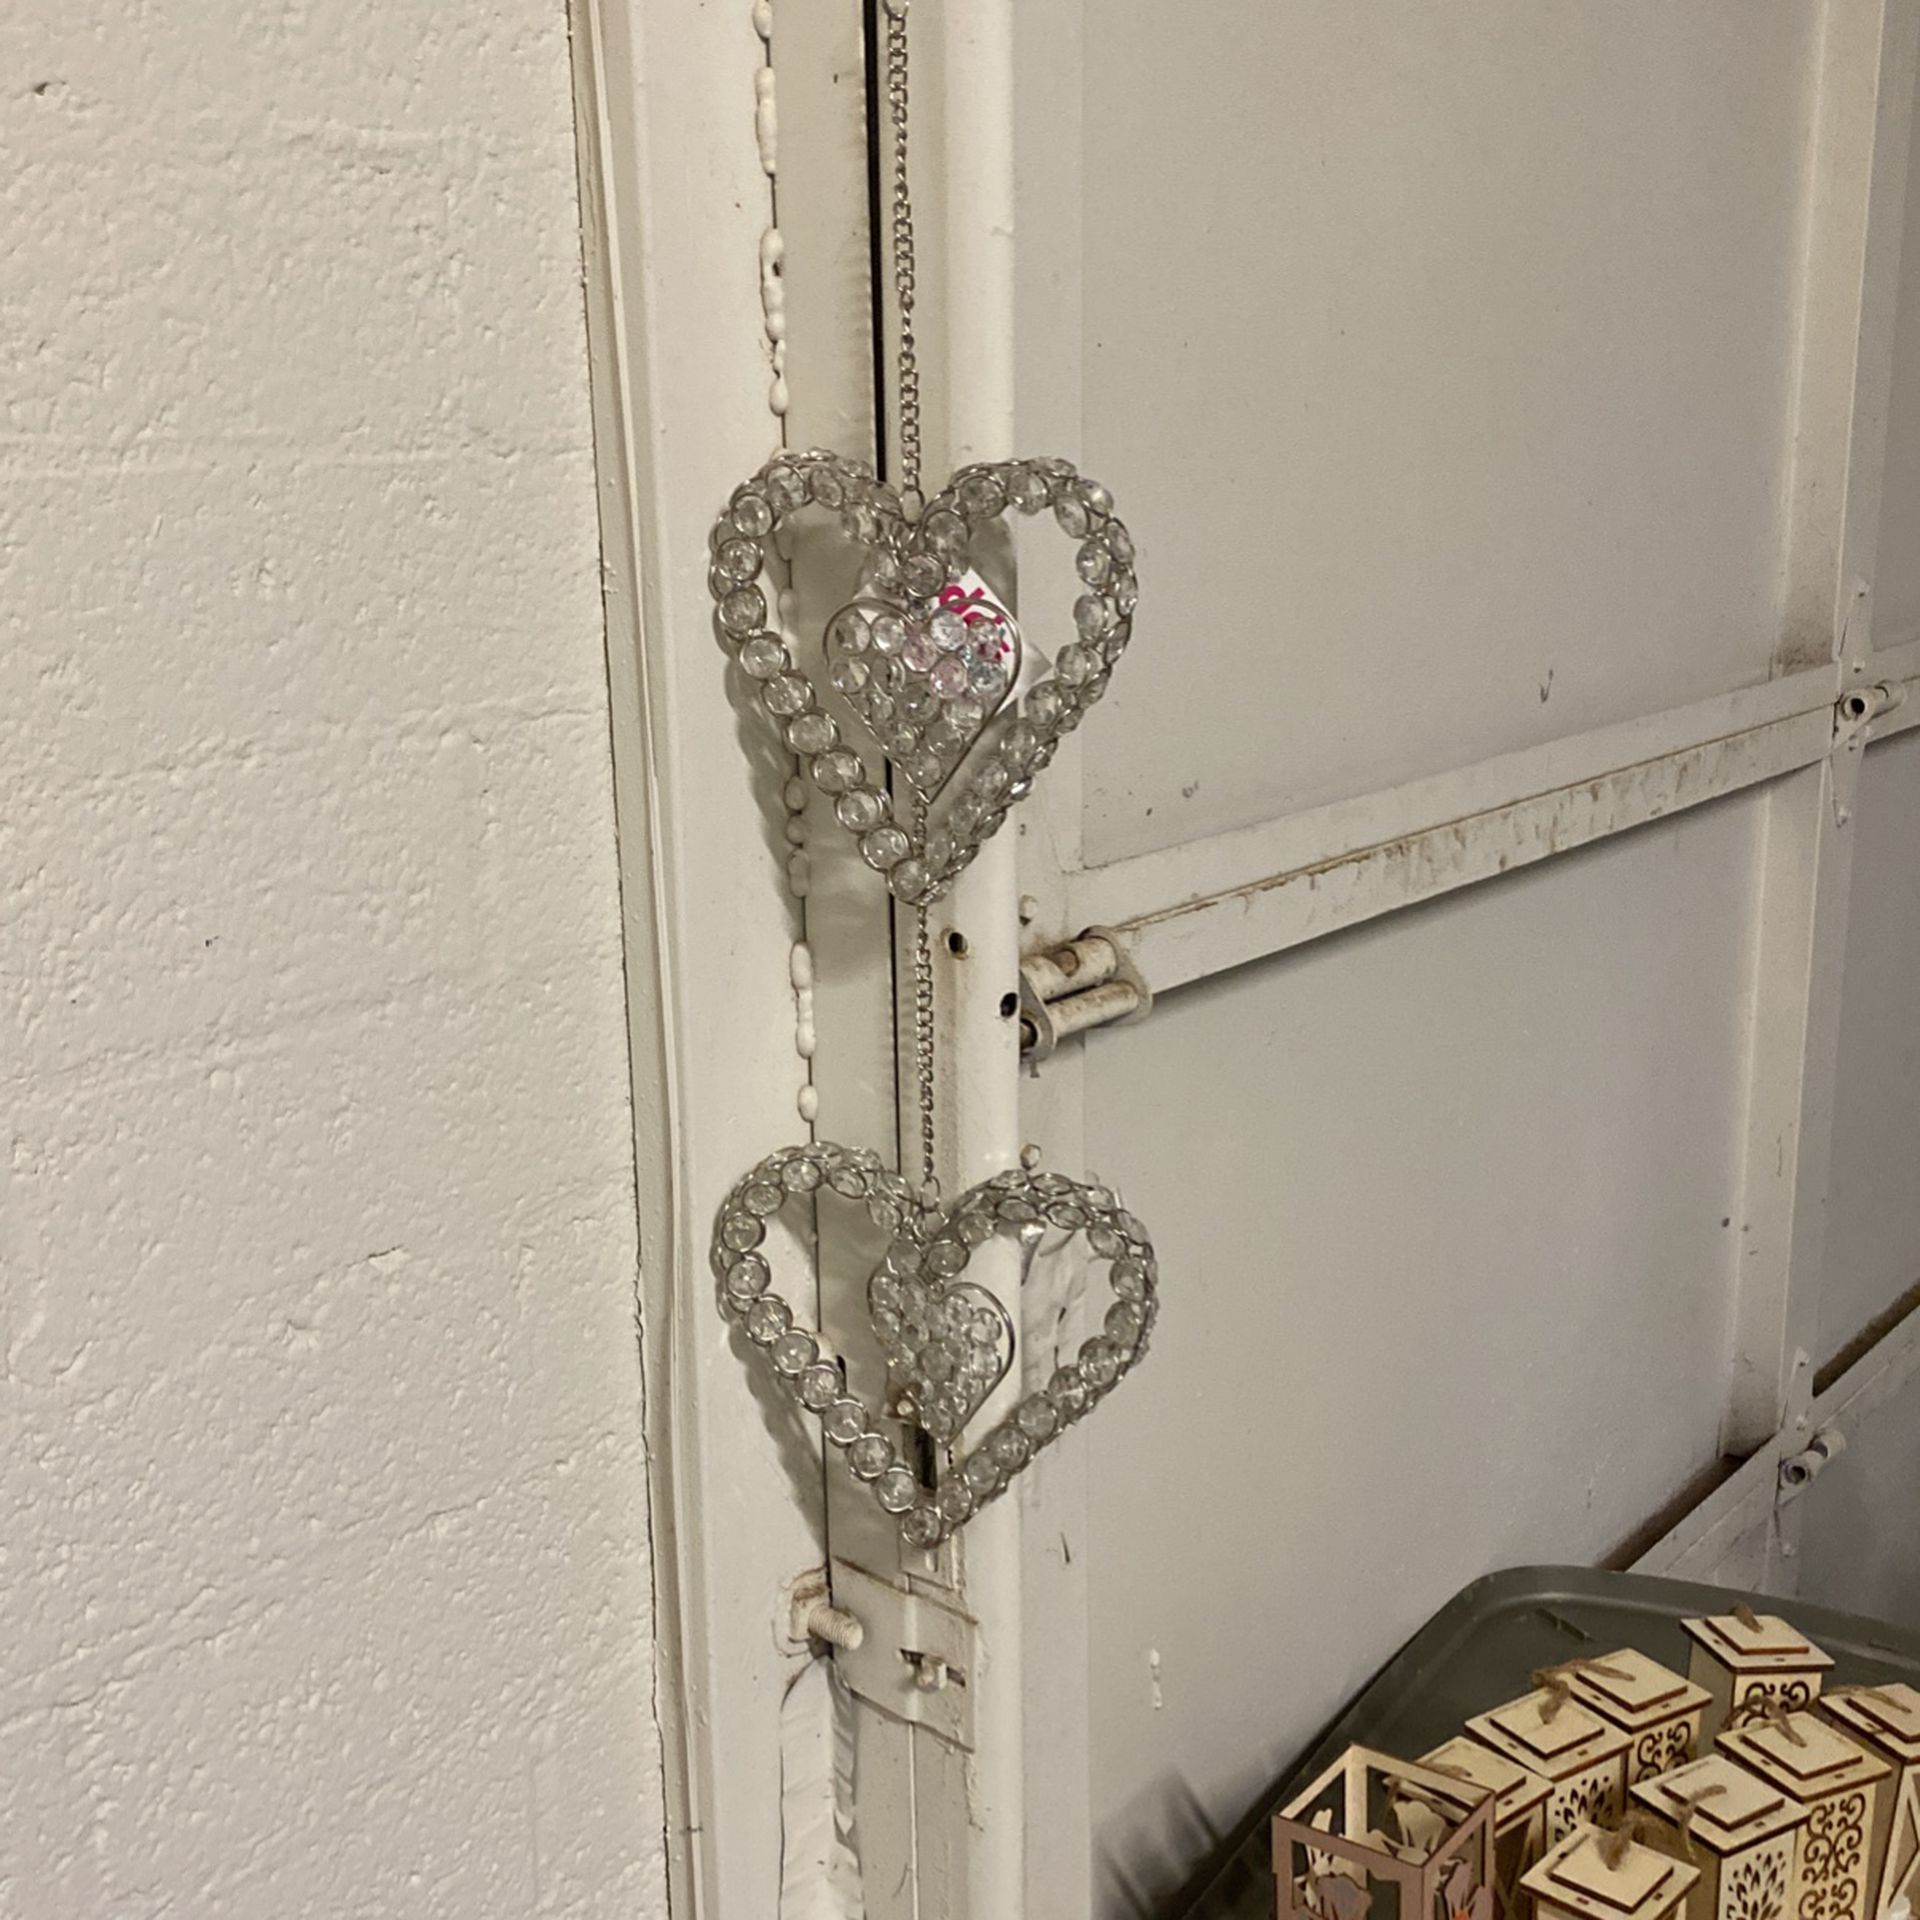 Two Hanging Heart